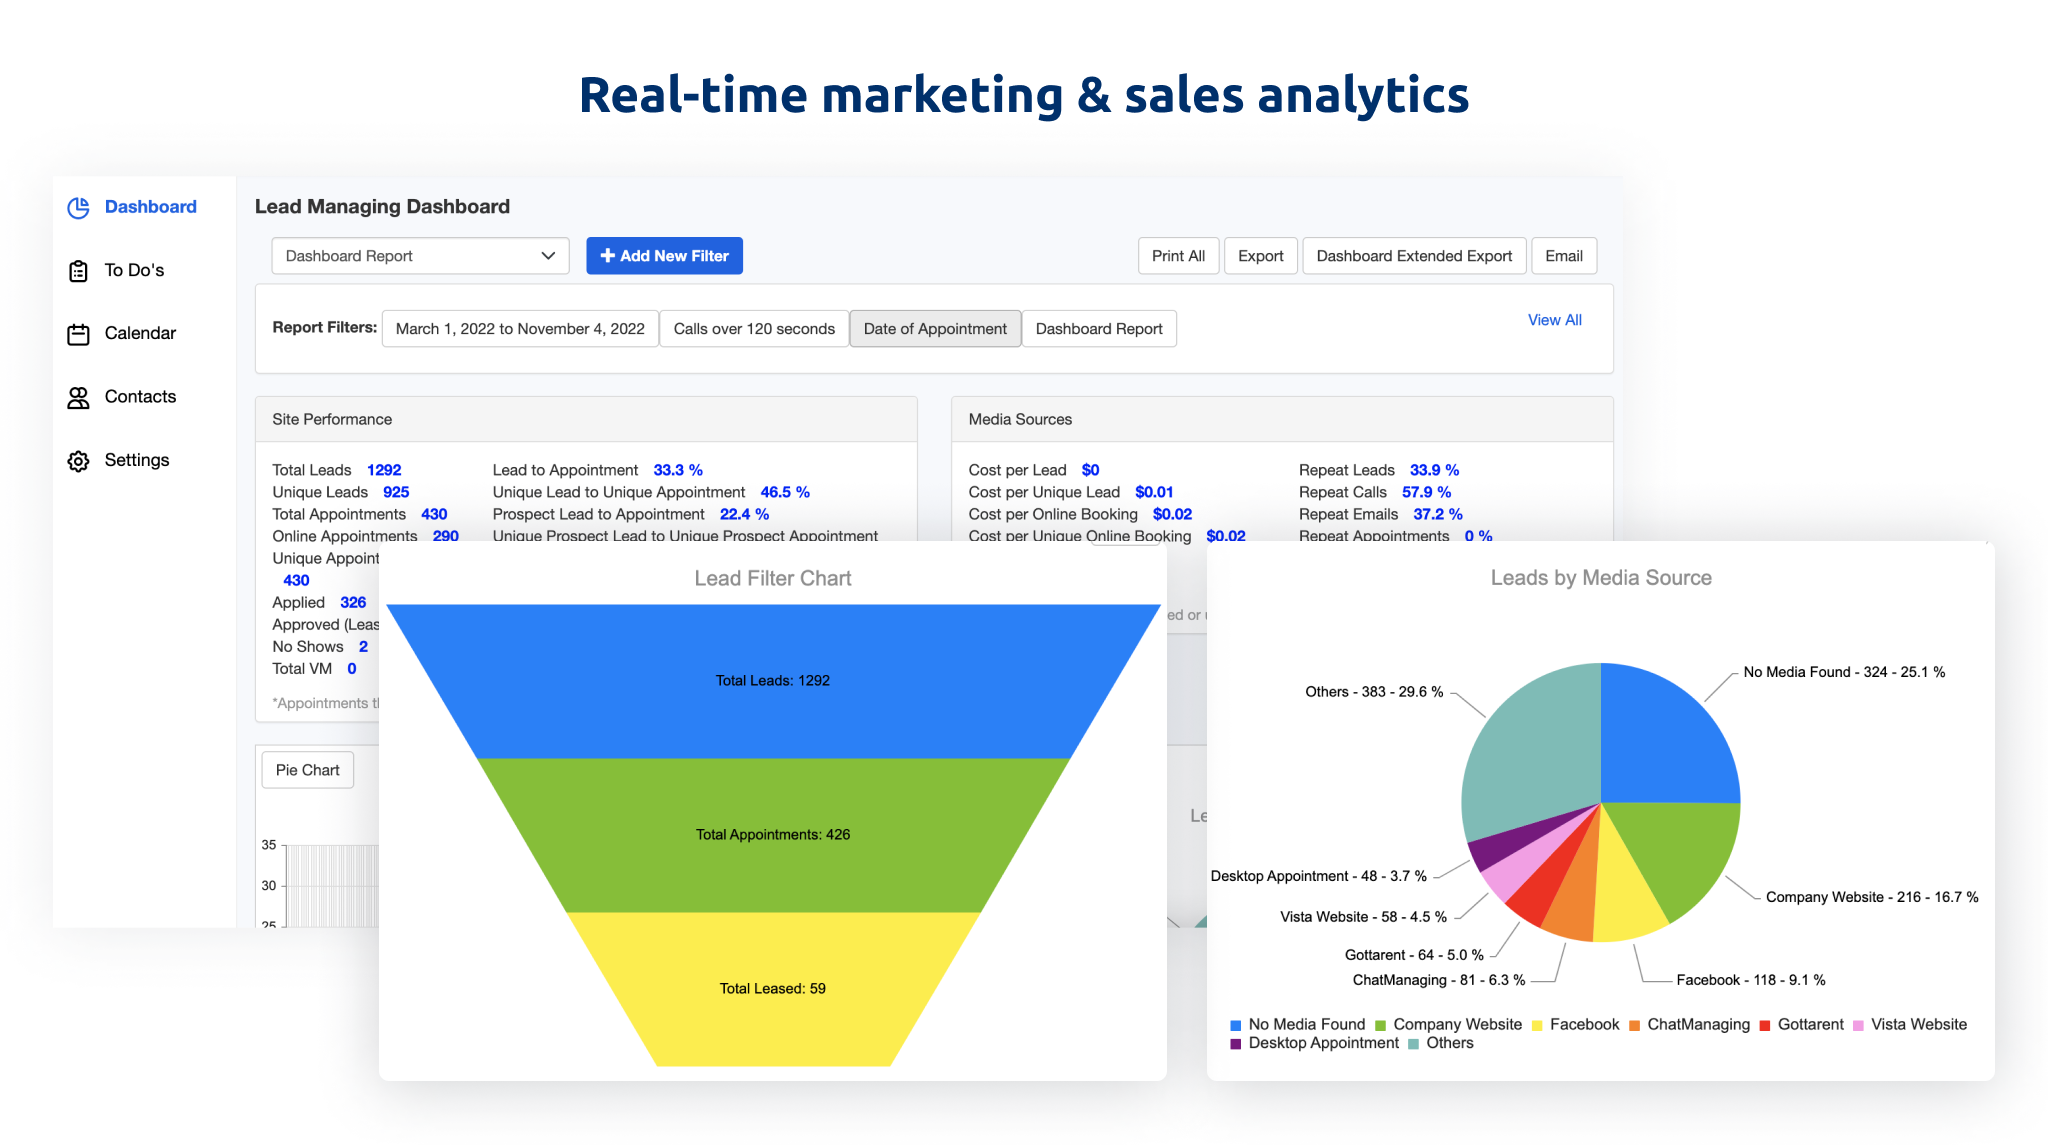 Make better data-backed business decisions. Optimize your sales and marketing investments by gaining a clear line of sight of your top and worst performing ad channels, percentage distribution of lead types, and more.